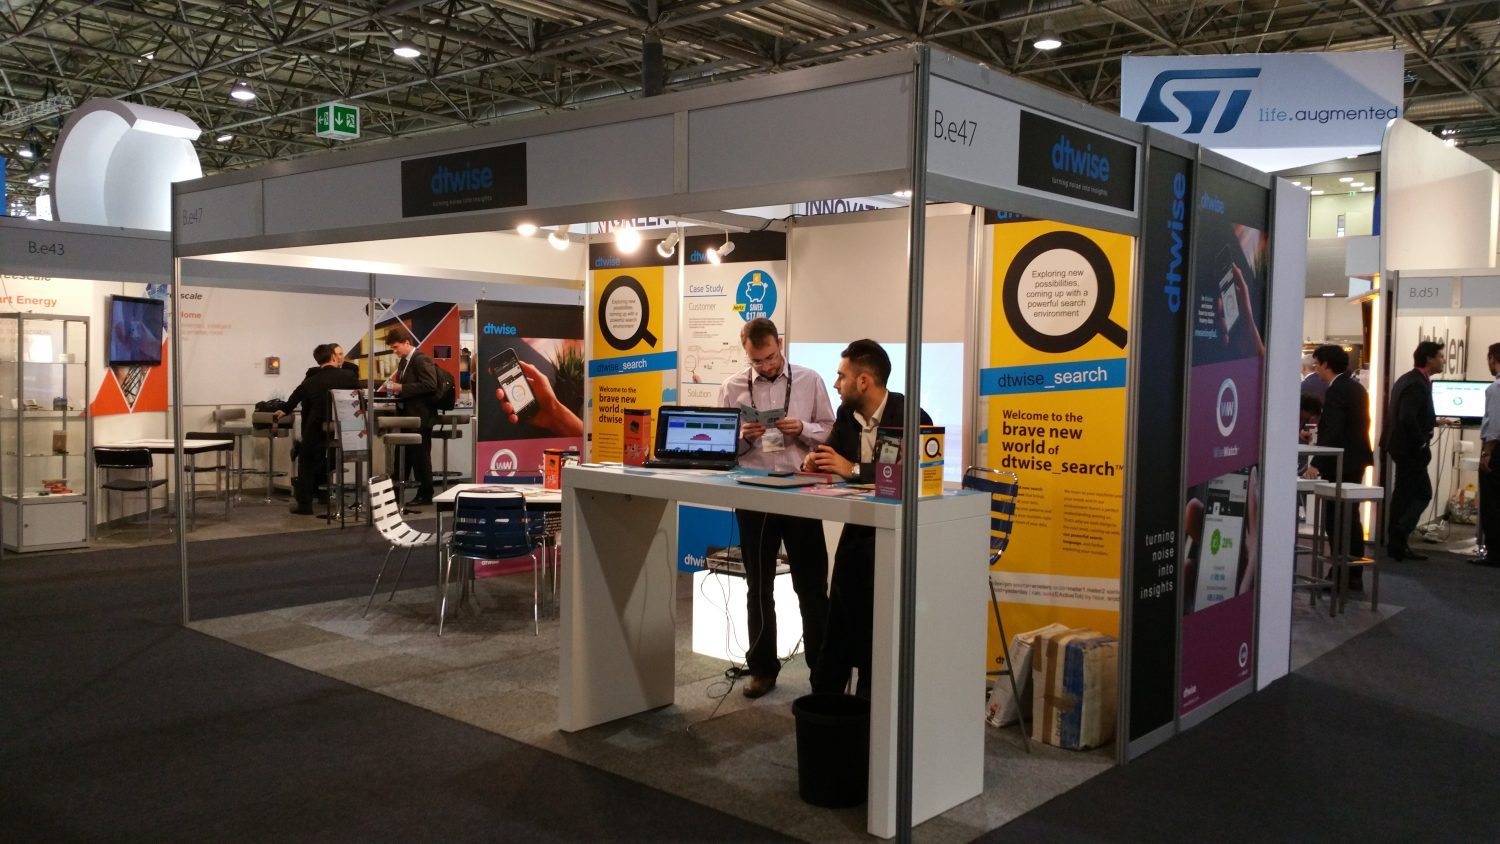 DTWISE at the European Utility Week 2015